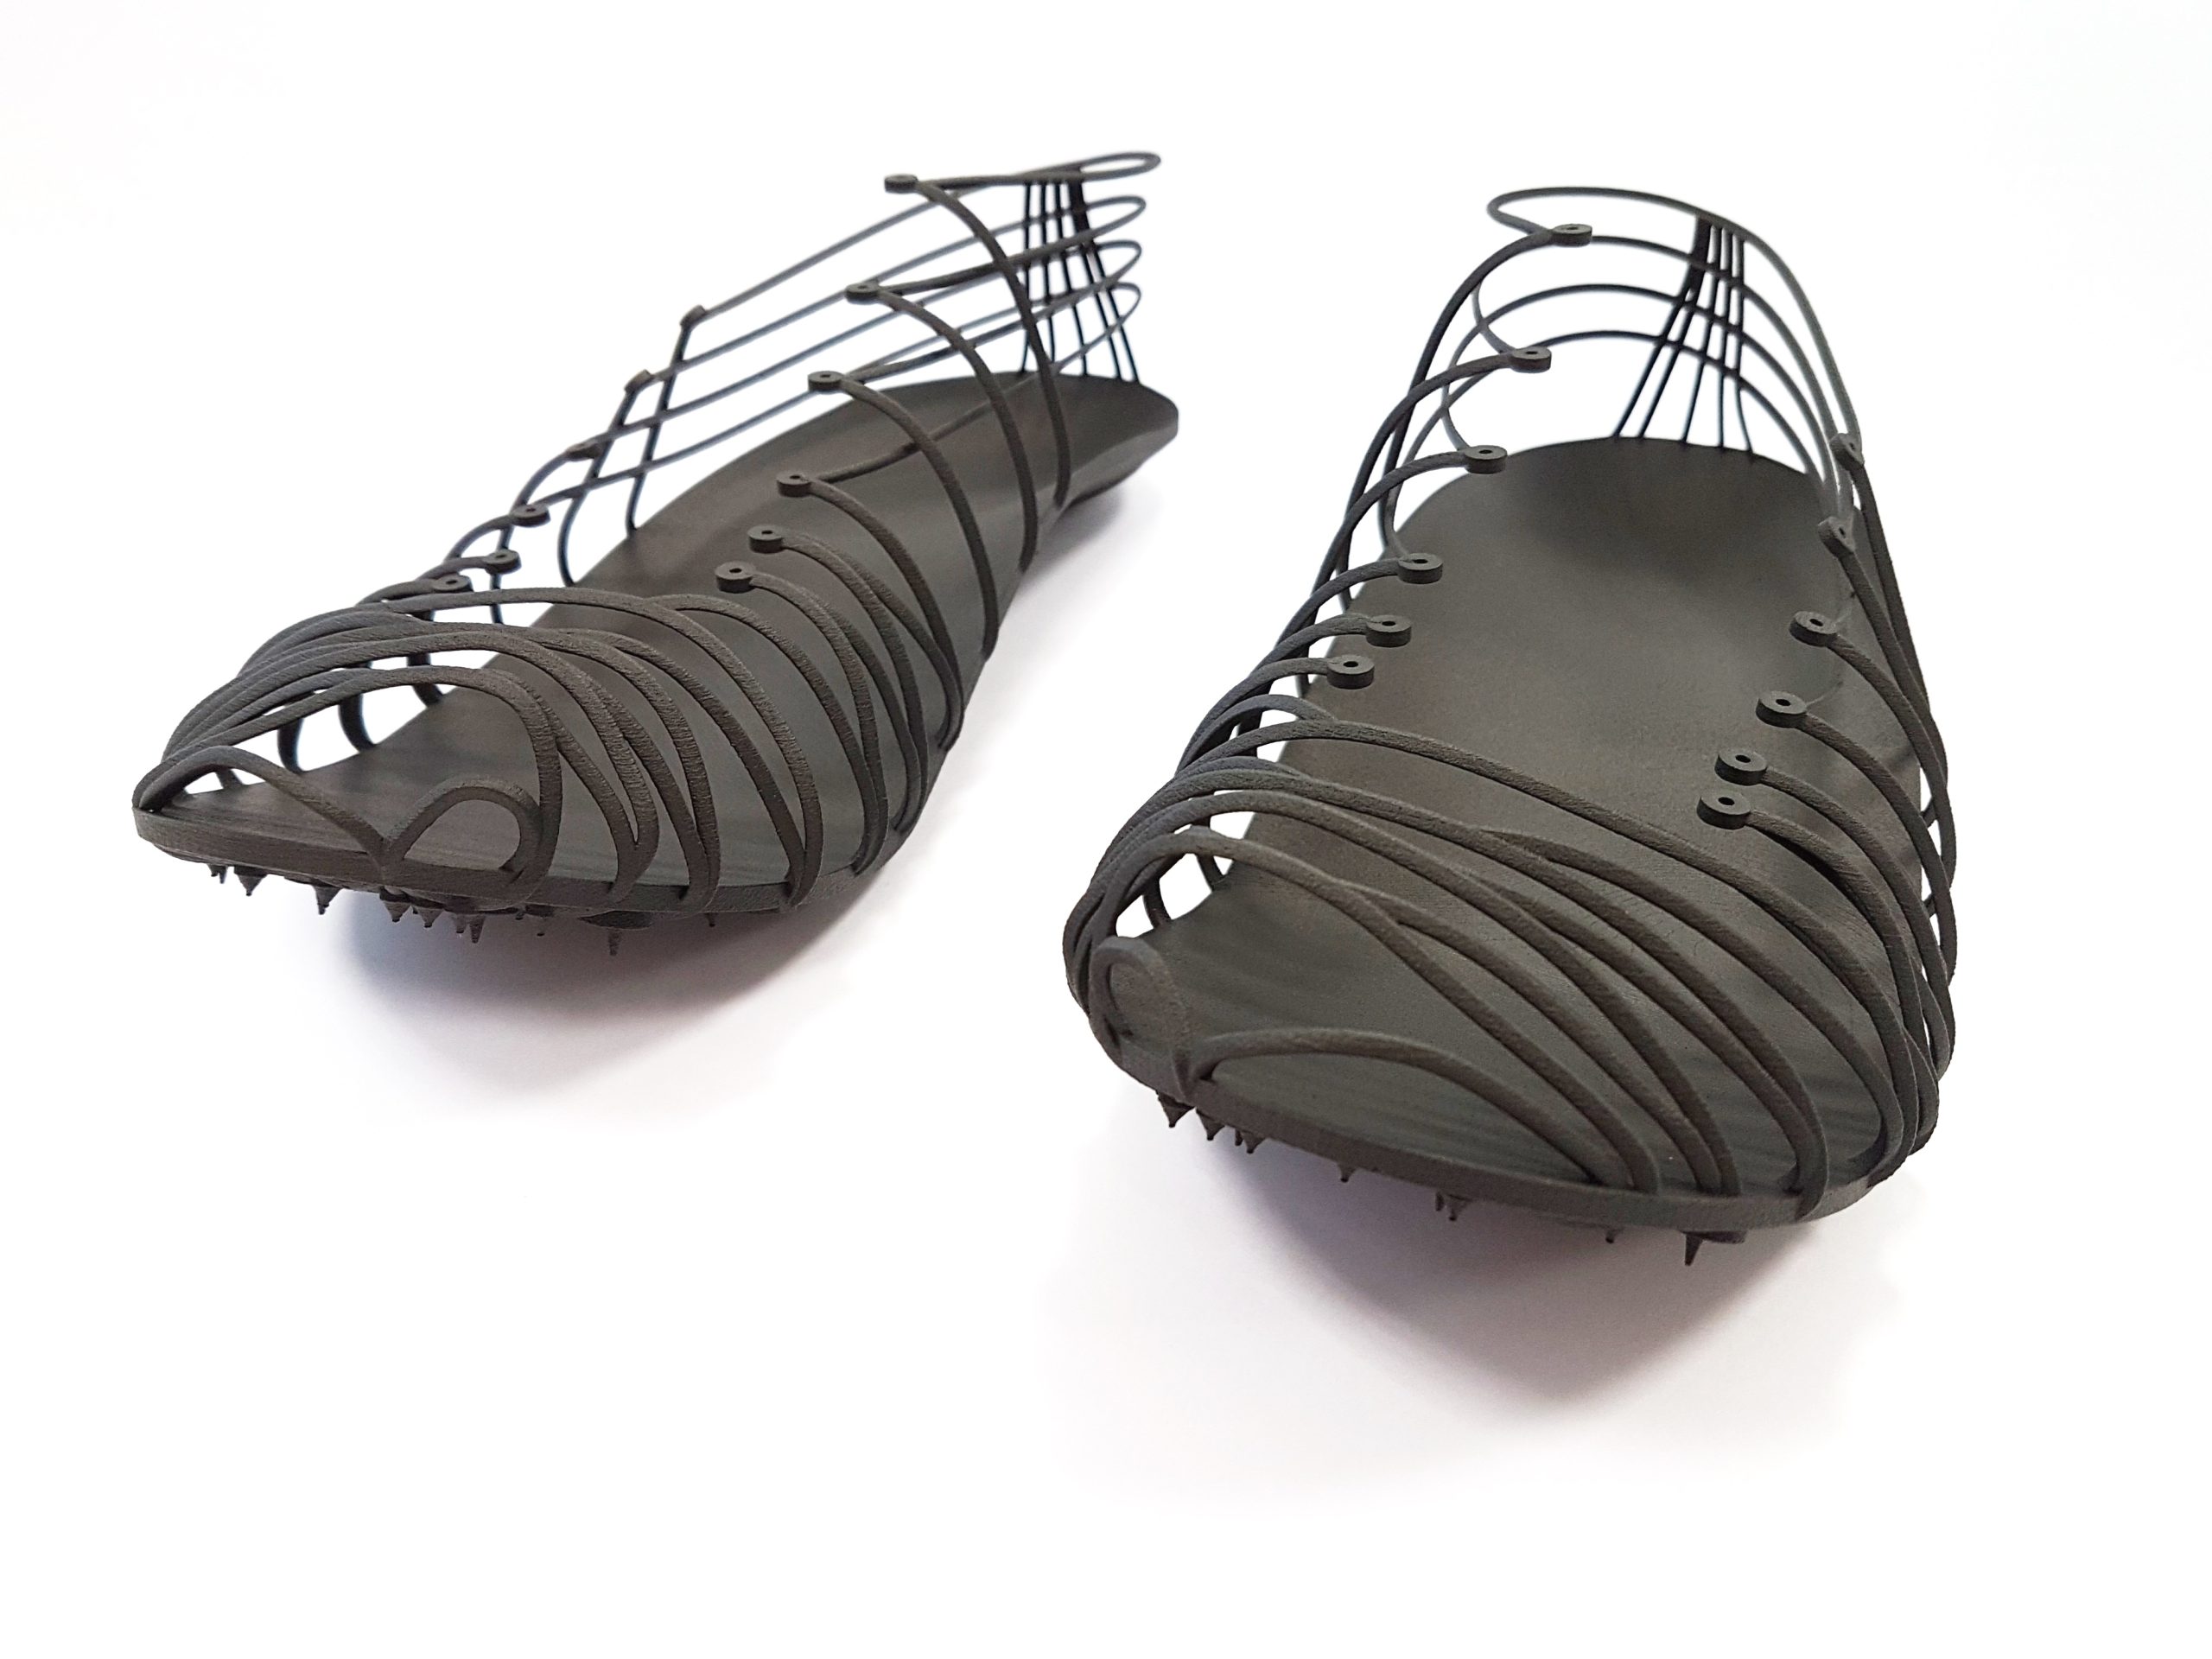 The Pleko shoe was 3D printed in CRP Technology's Windform SP carbon fiber filled composite material. Photo via CRP Technology.